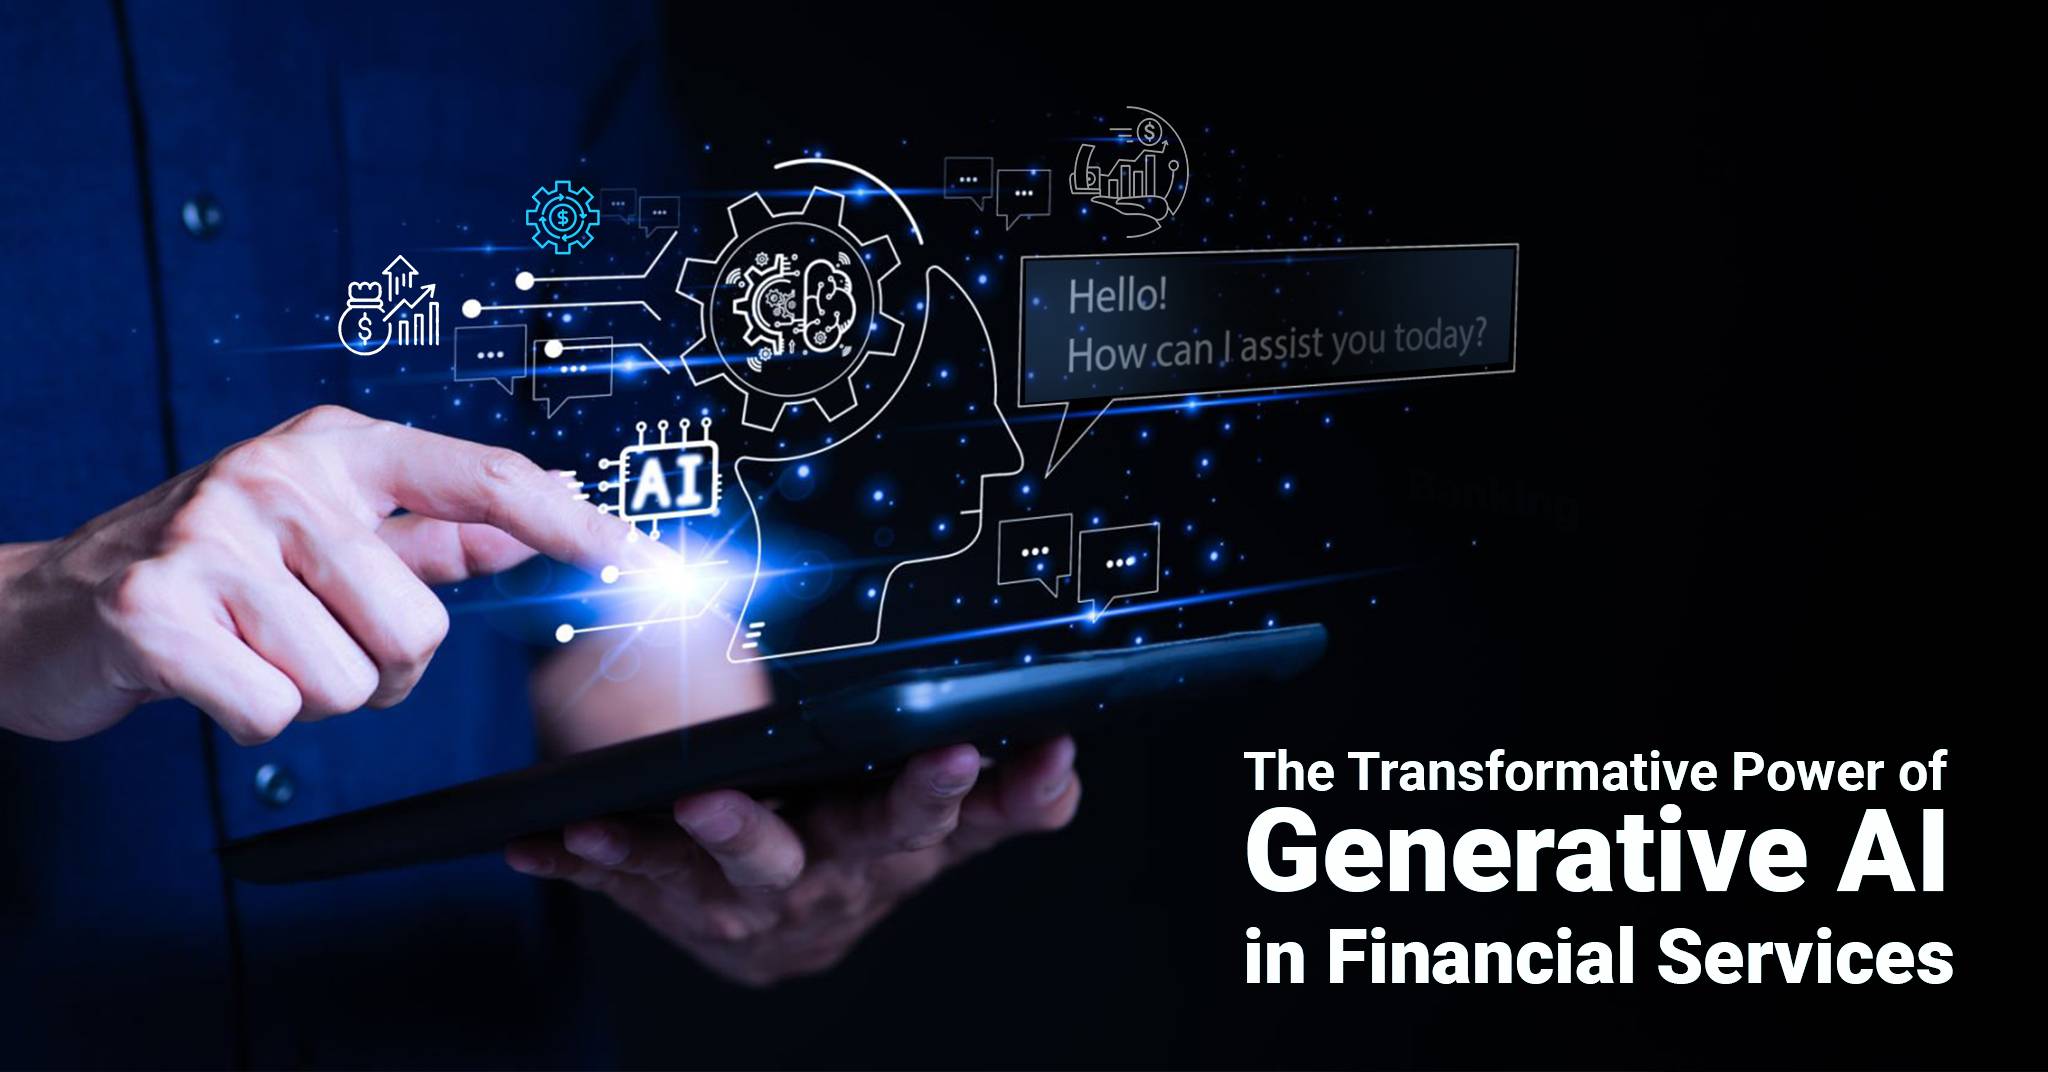 Financial Services with Generative AI